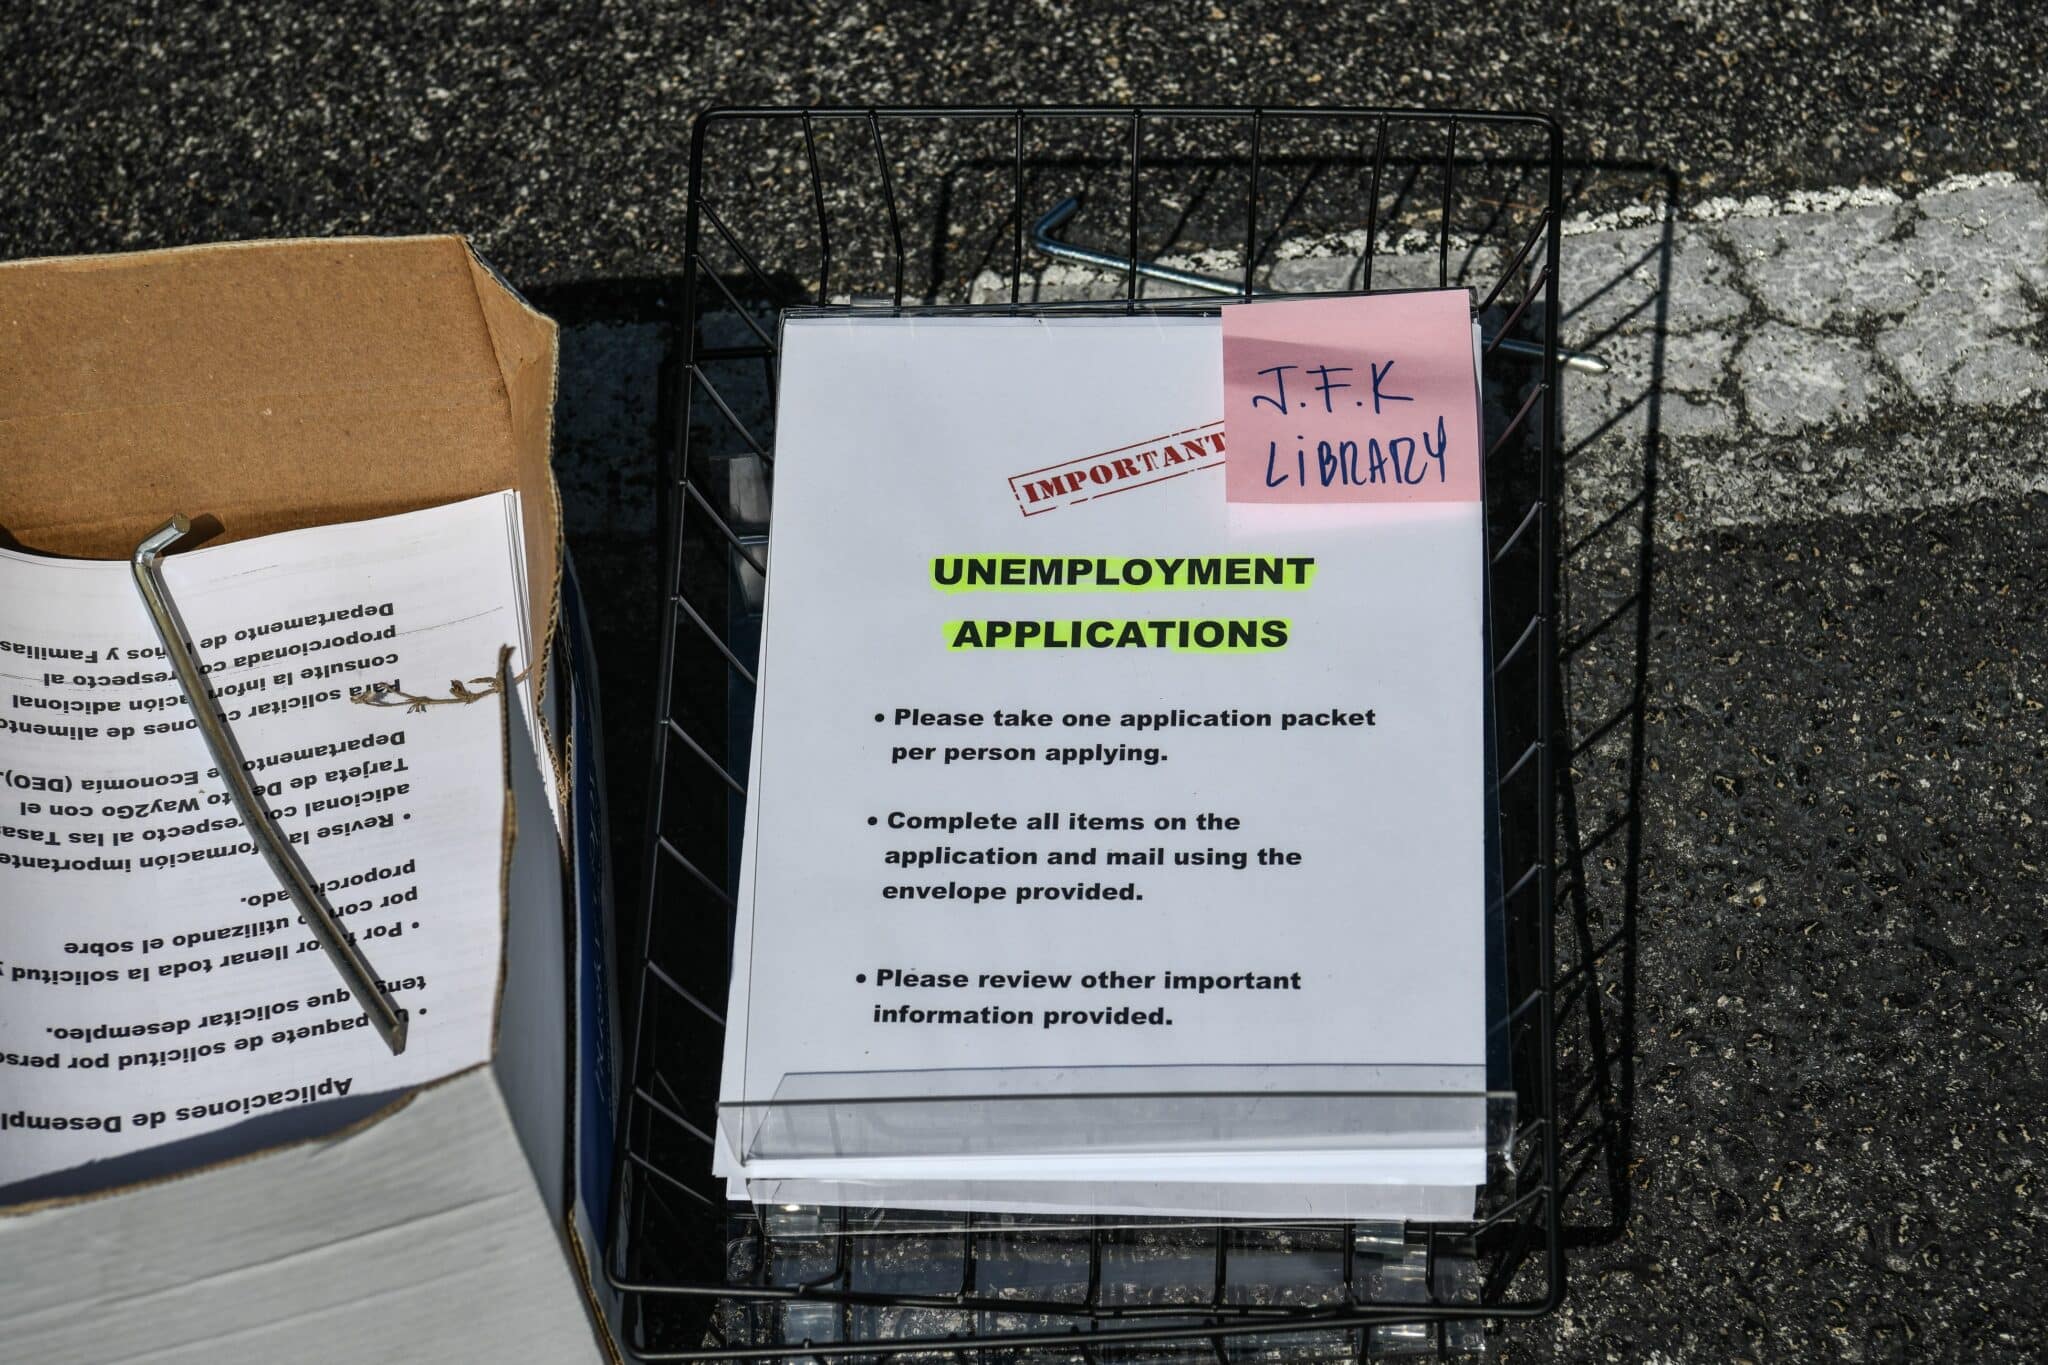 Unemployment forms are seen kept at a drive thru collection point outside John F. Kennedy Library in Hialeah, Florida, on April 8, 2020. (Photo by CHANDAN KHANNA / AFP) (Photo by CHANDAN KHANNA/AFP via Getty Images)